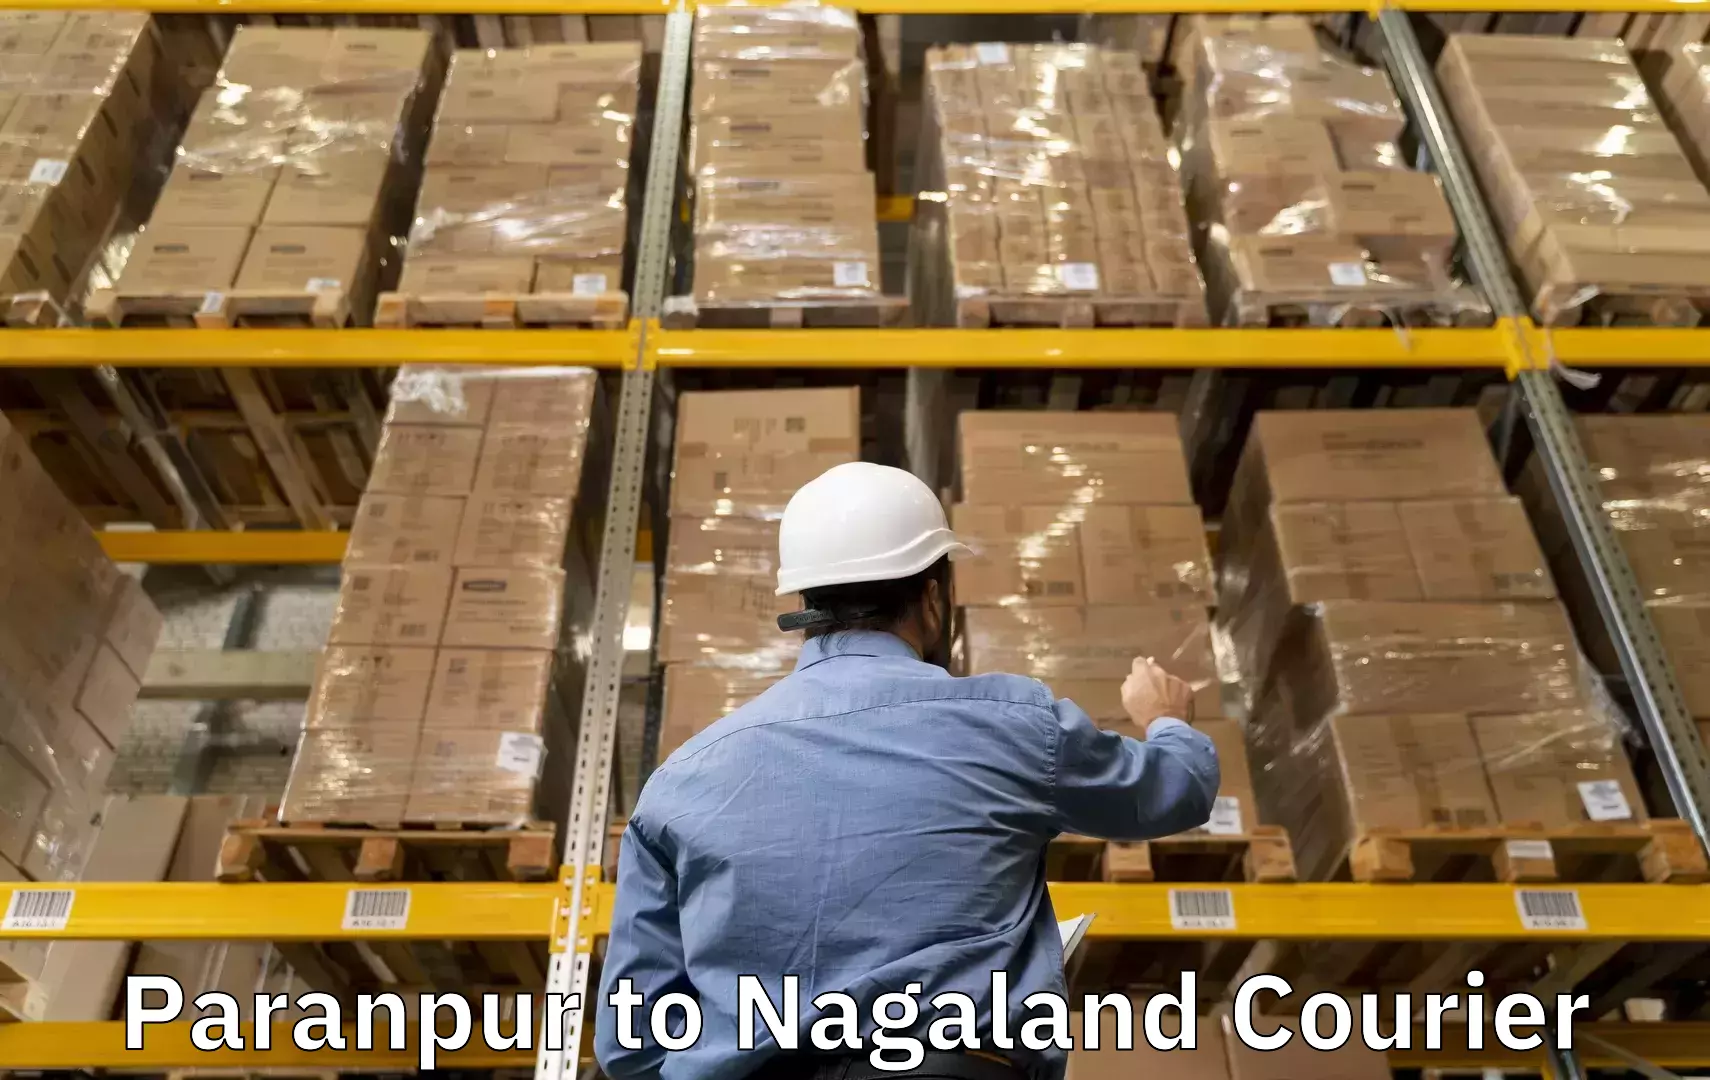 Baggage transport network Paranpur to Nagaland